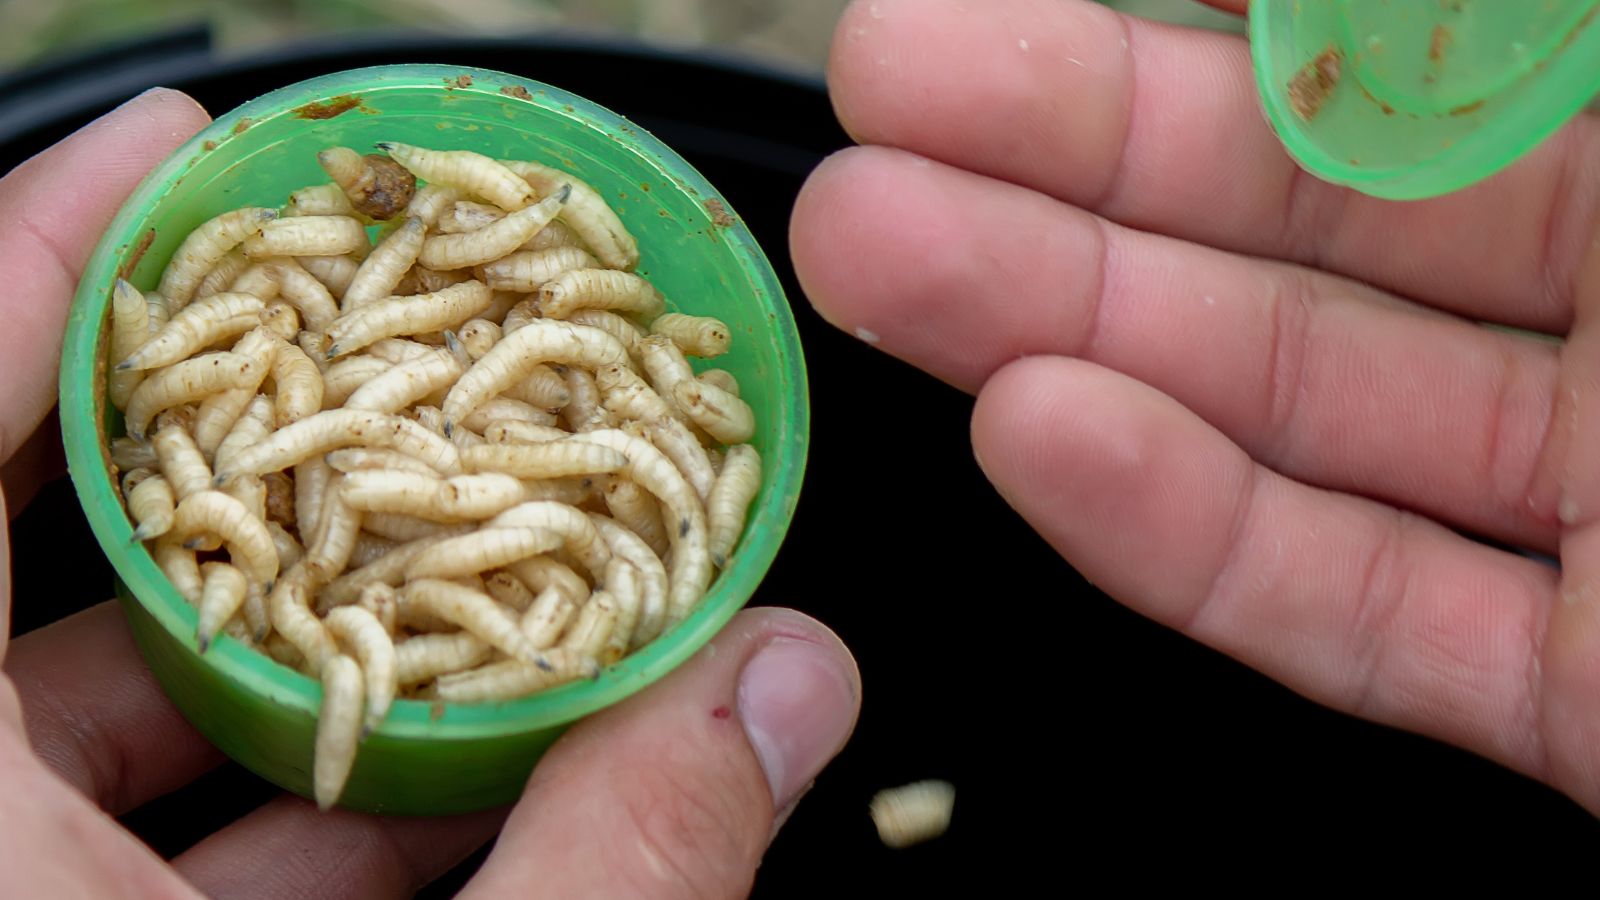 Man holding a cup of maggots.